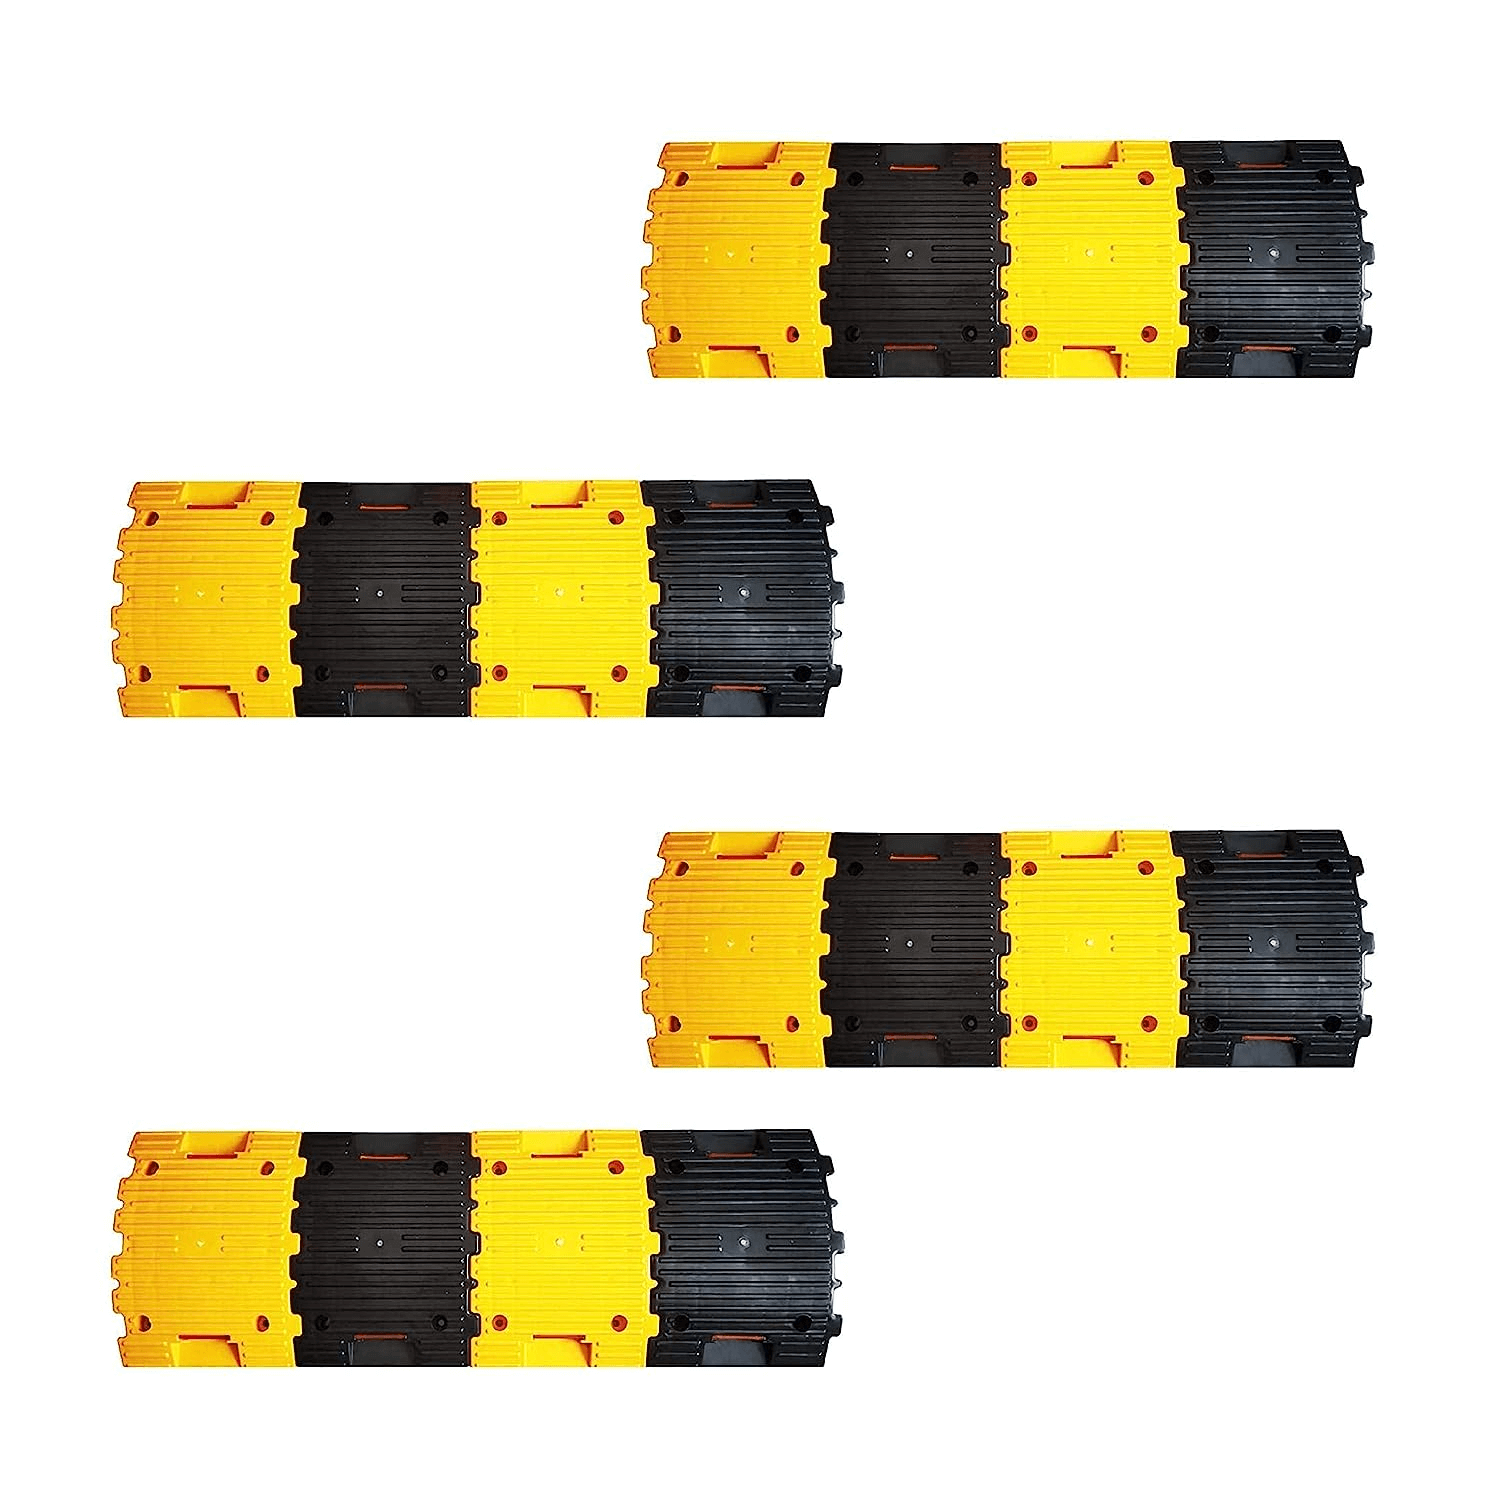 robustt-plastic-speed-bump-1mtr-50mm-road-reflectors-for-high-visibility-and-concrete-traffic-driveway-8-yellow-8-black-pieces-pack-of-4